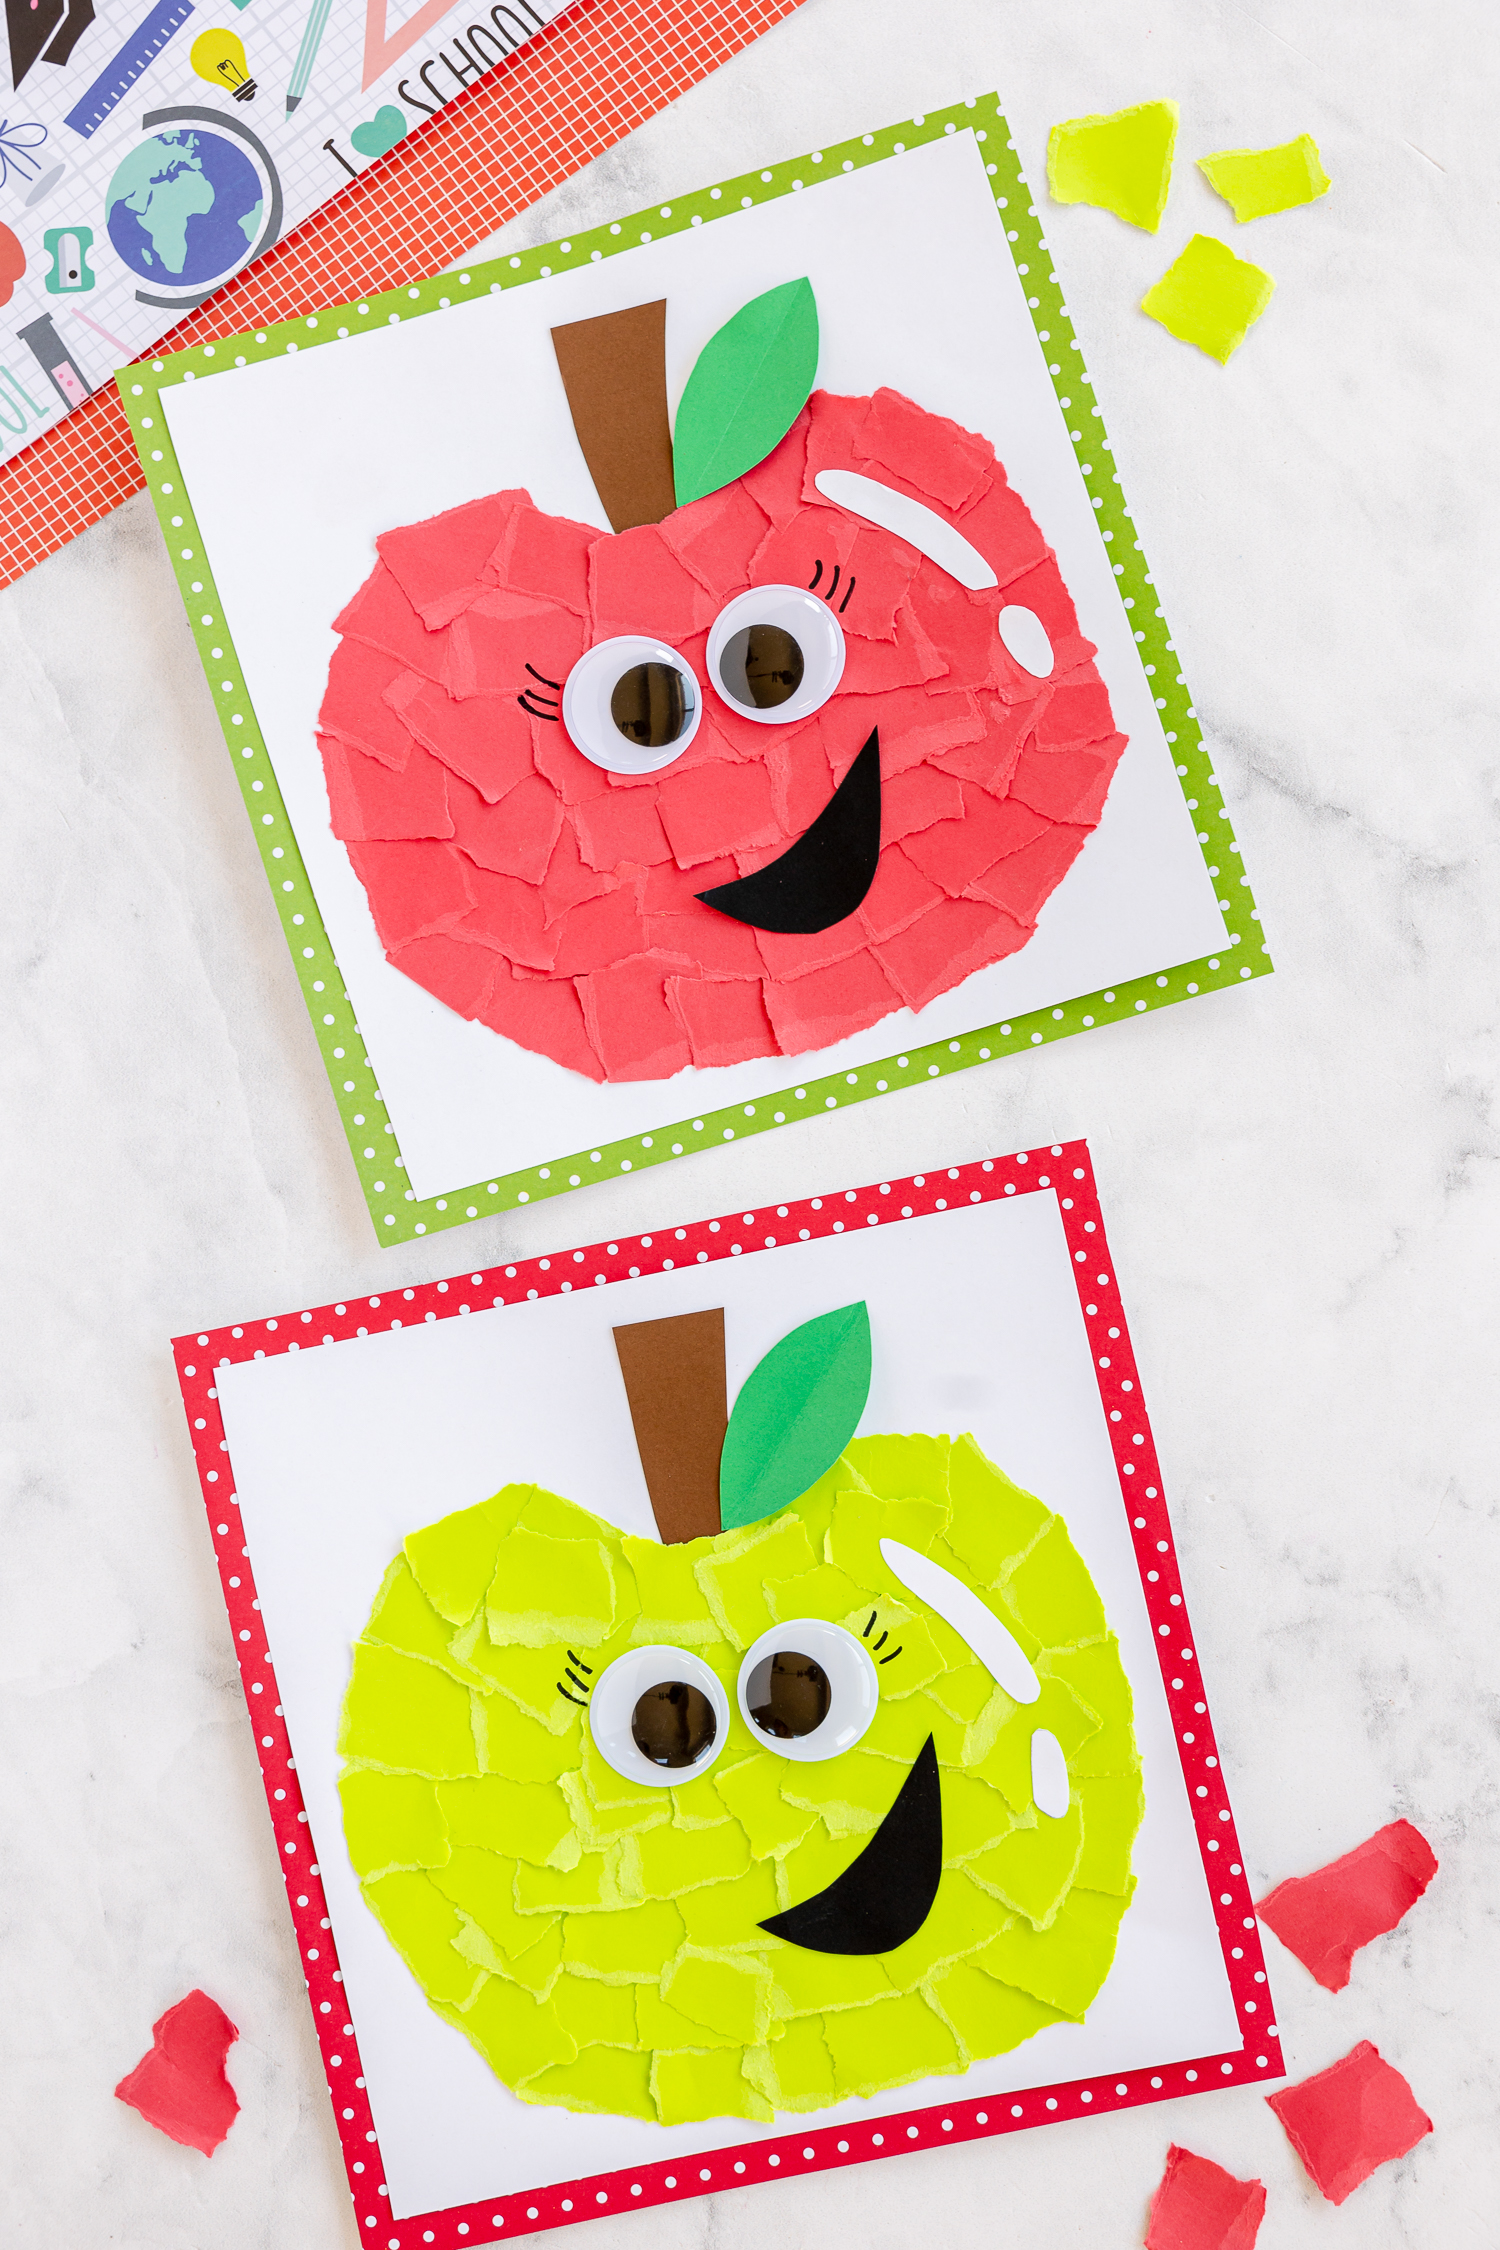 apple craft using torn paper pieces